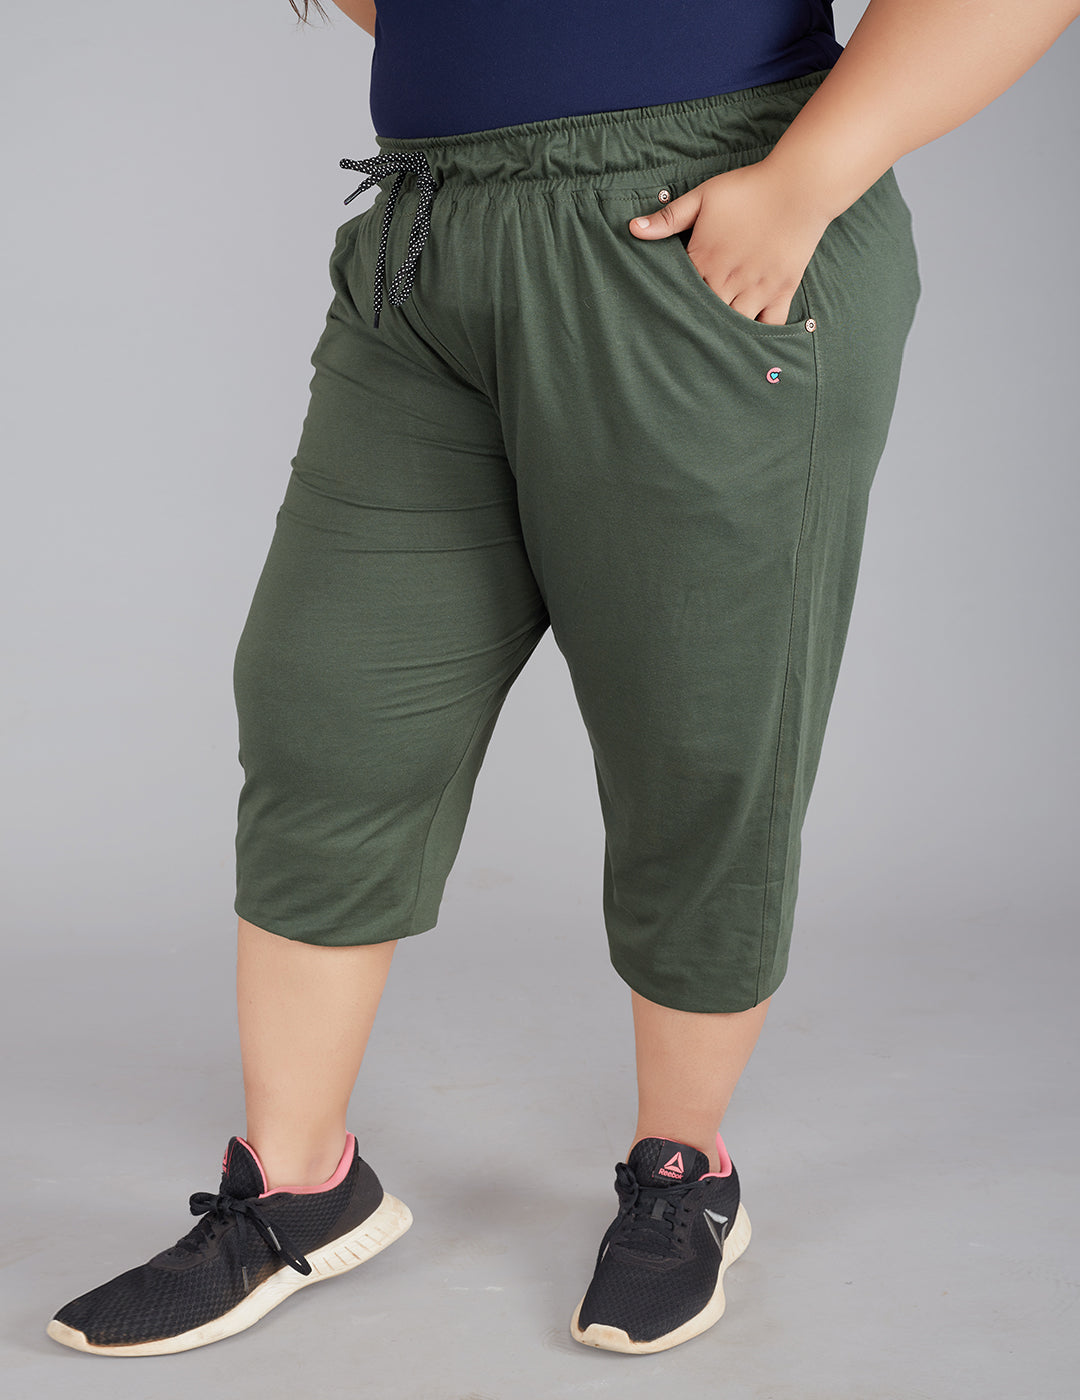 Stylish Olive Green Cotton Capri Pants For Women online in India